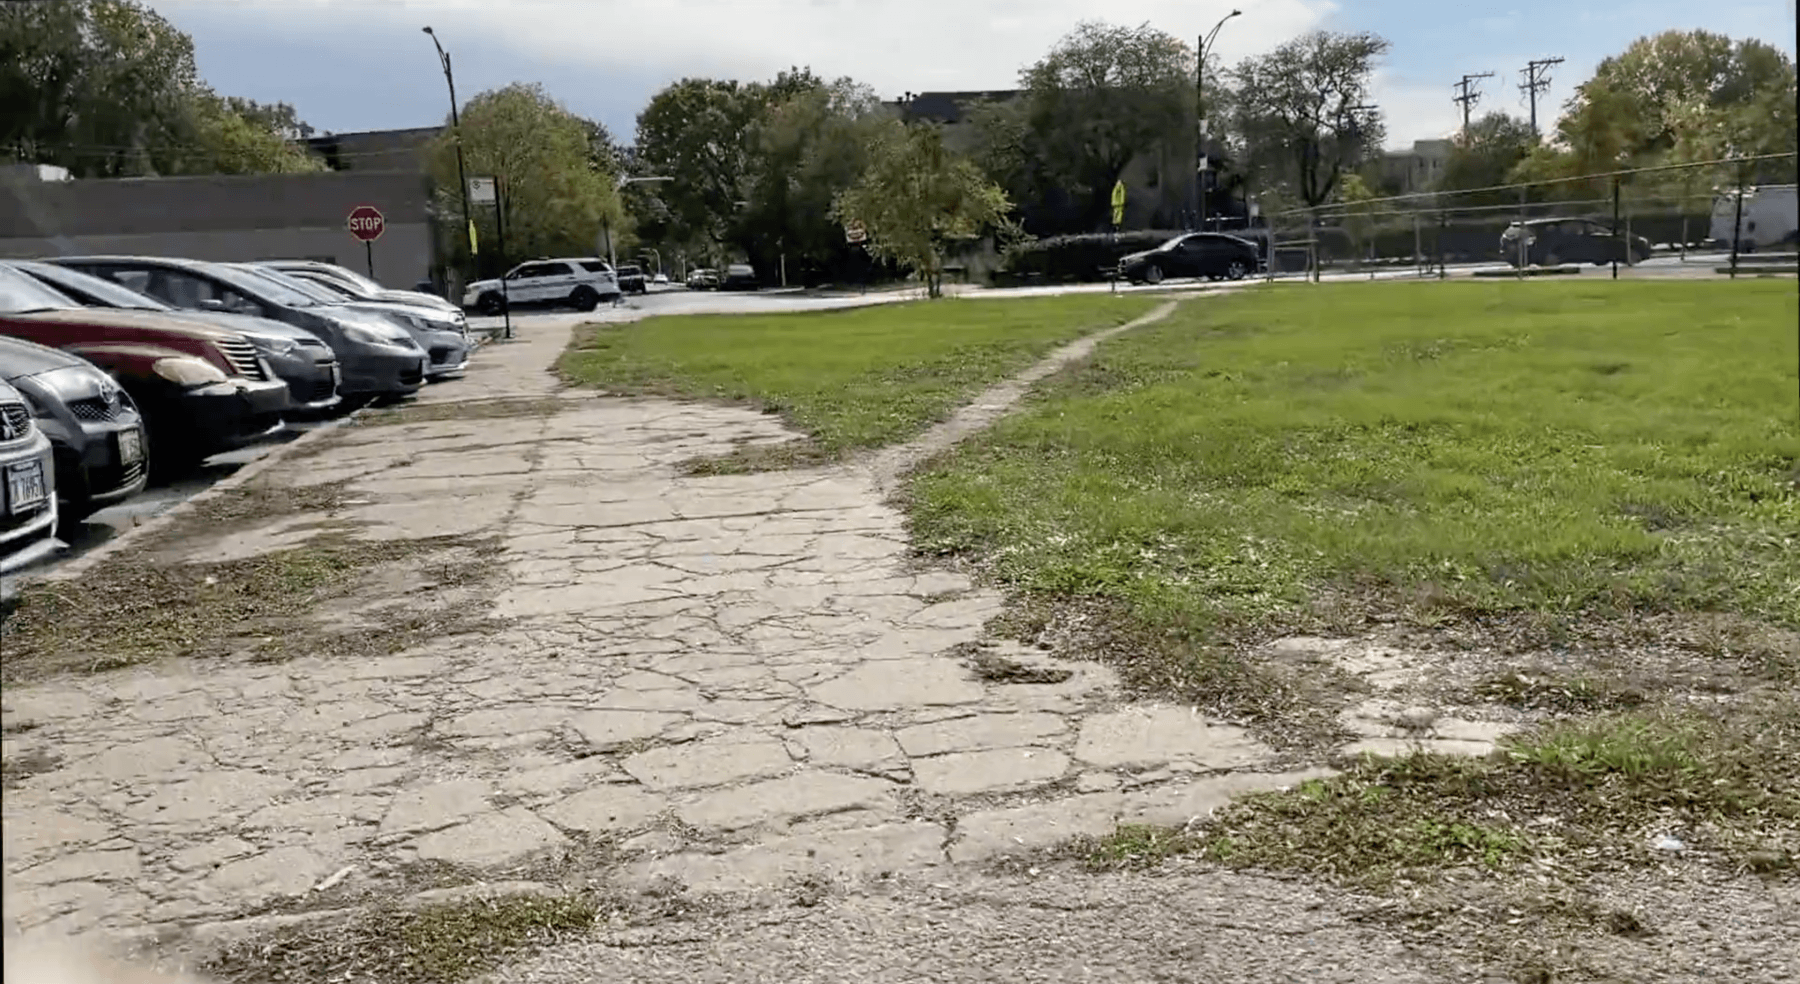 Image of a lot, on the right is grass with a small dirt pathway cut through it. On the right is broken up pavement with cars parked facing the curb.